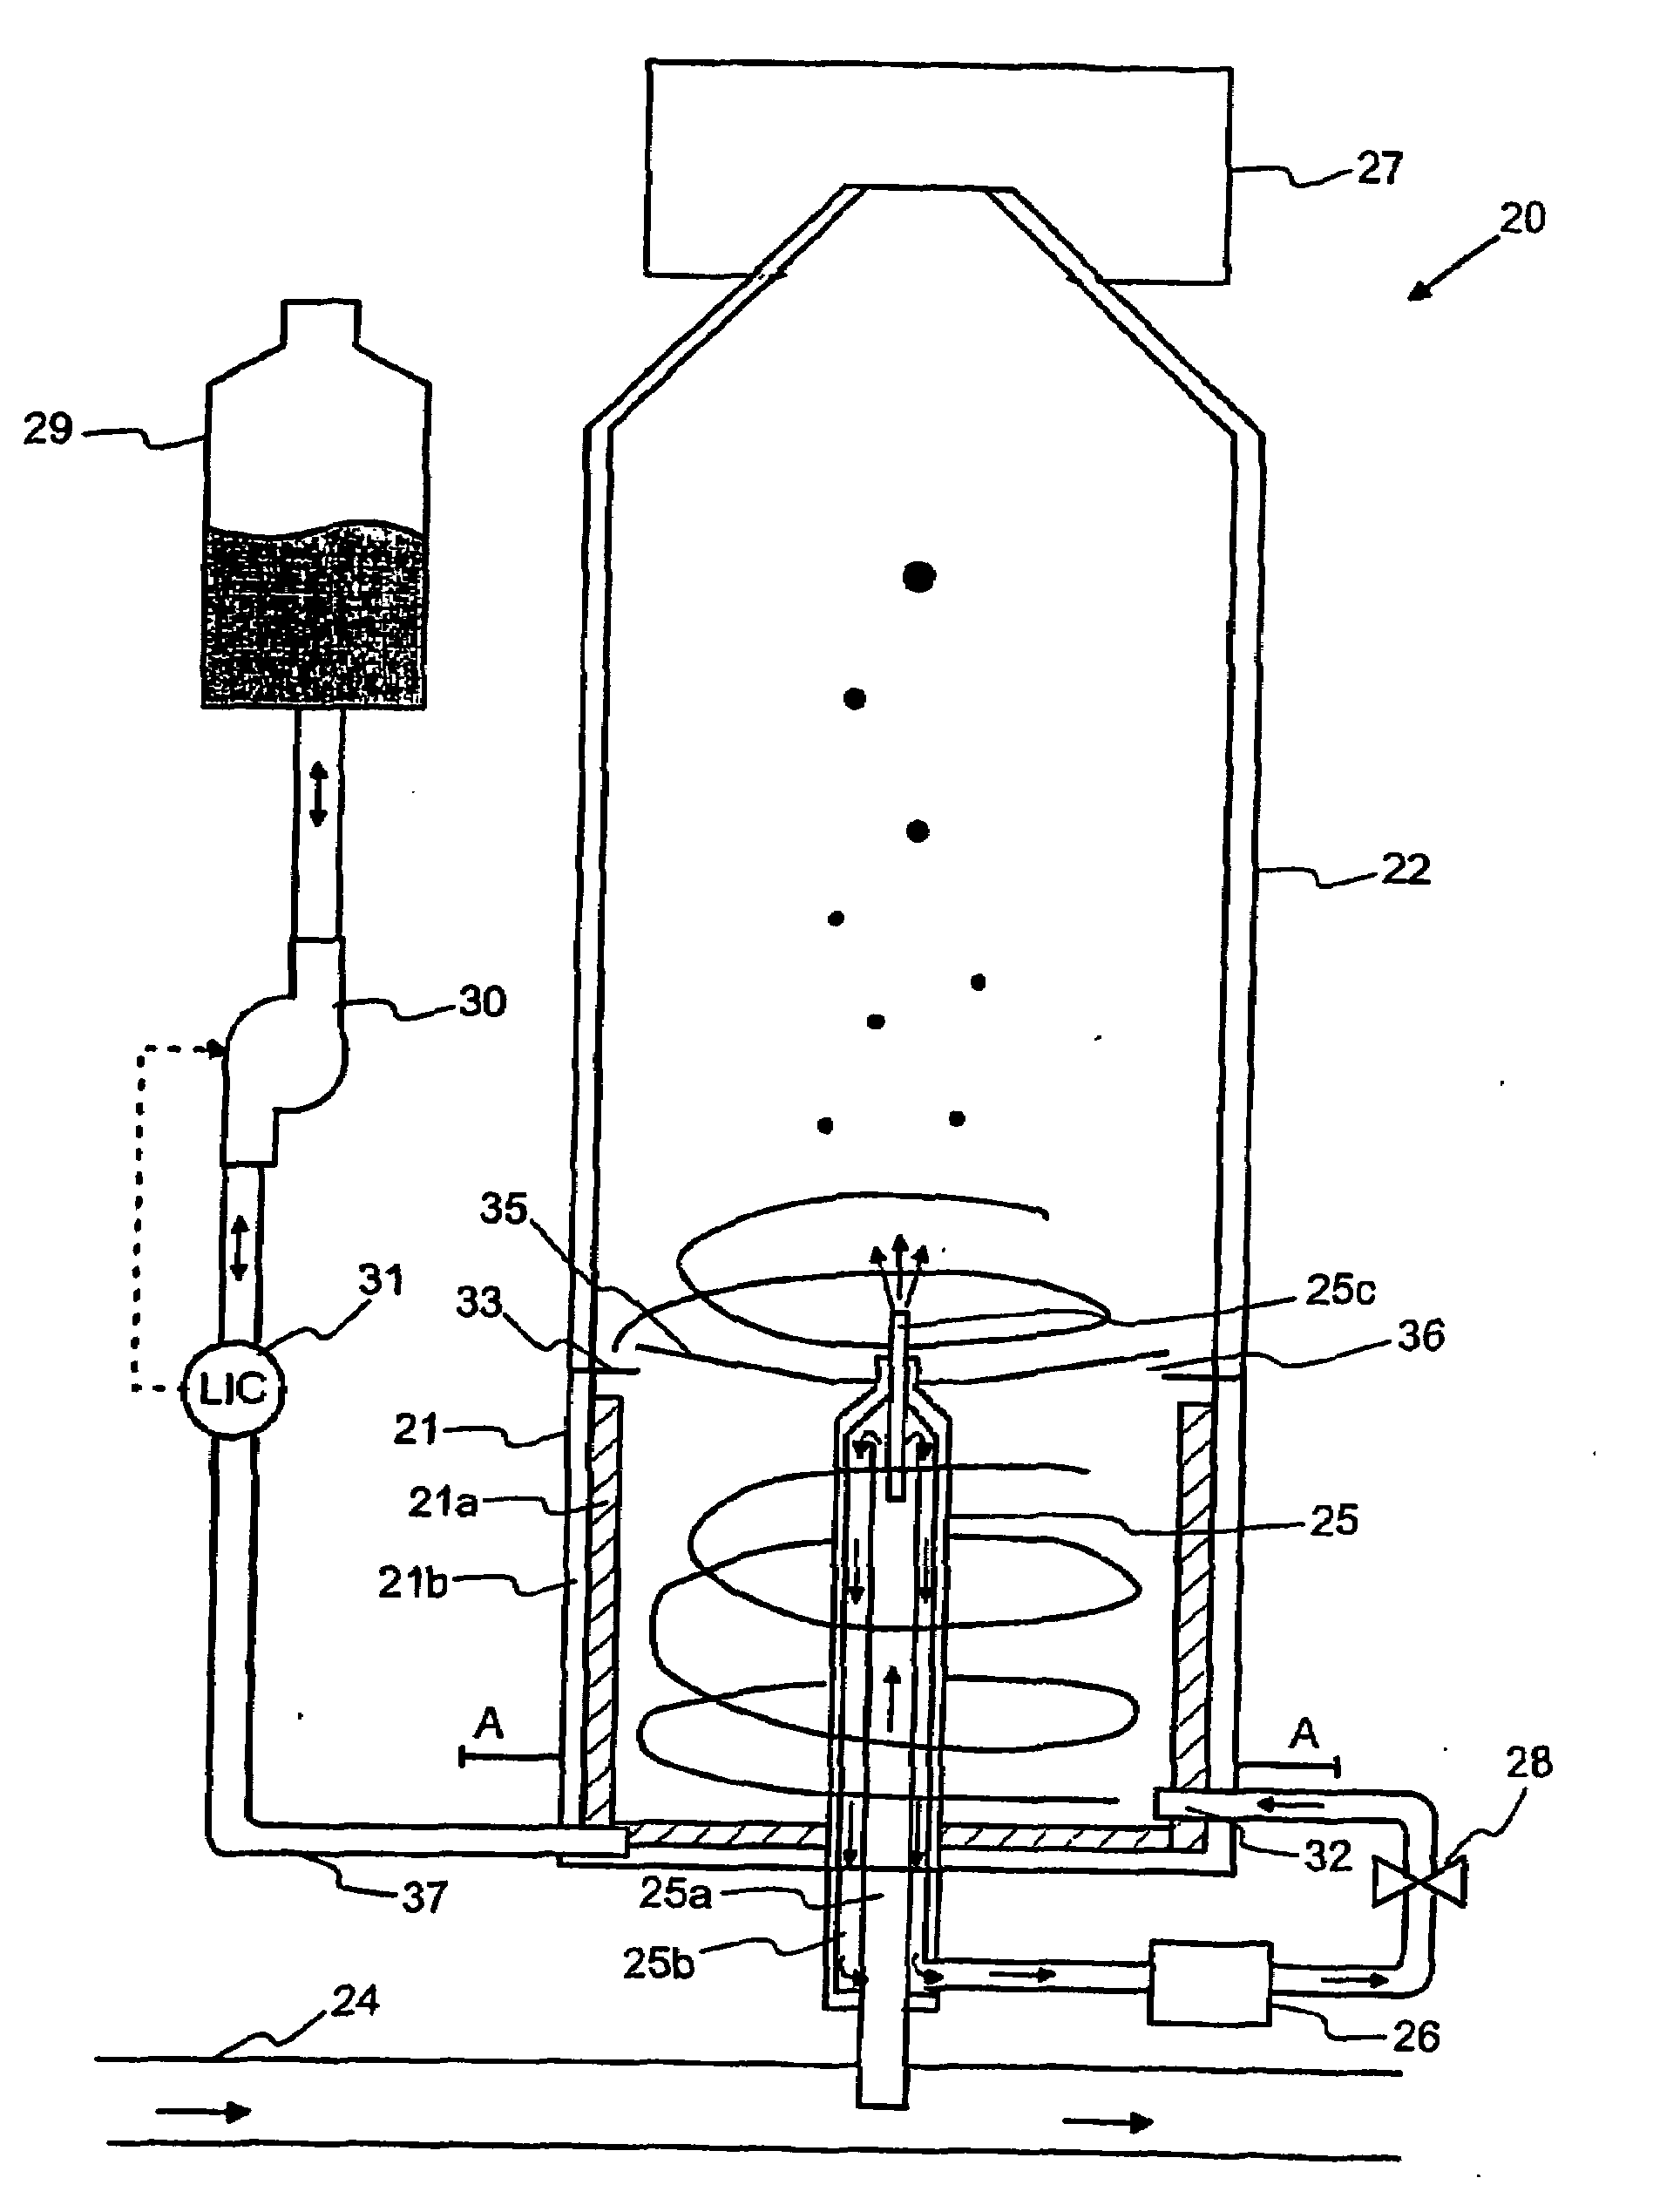 Method and apparatus for increasing the size of small particles